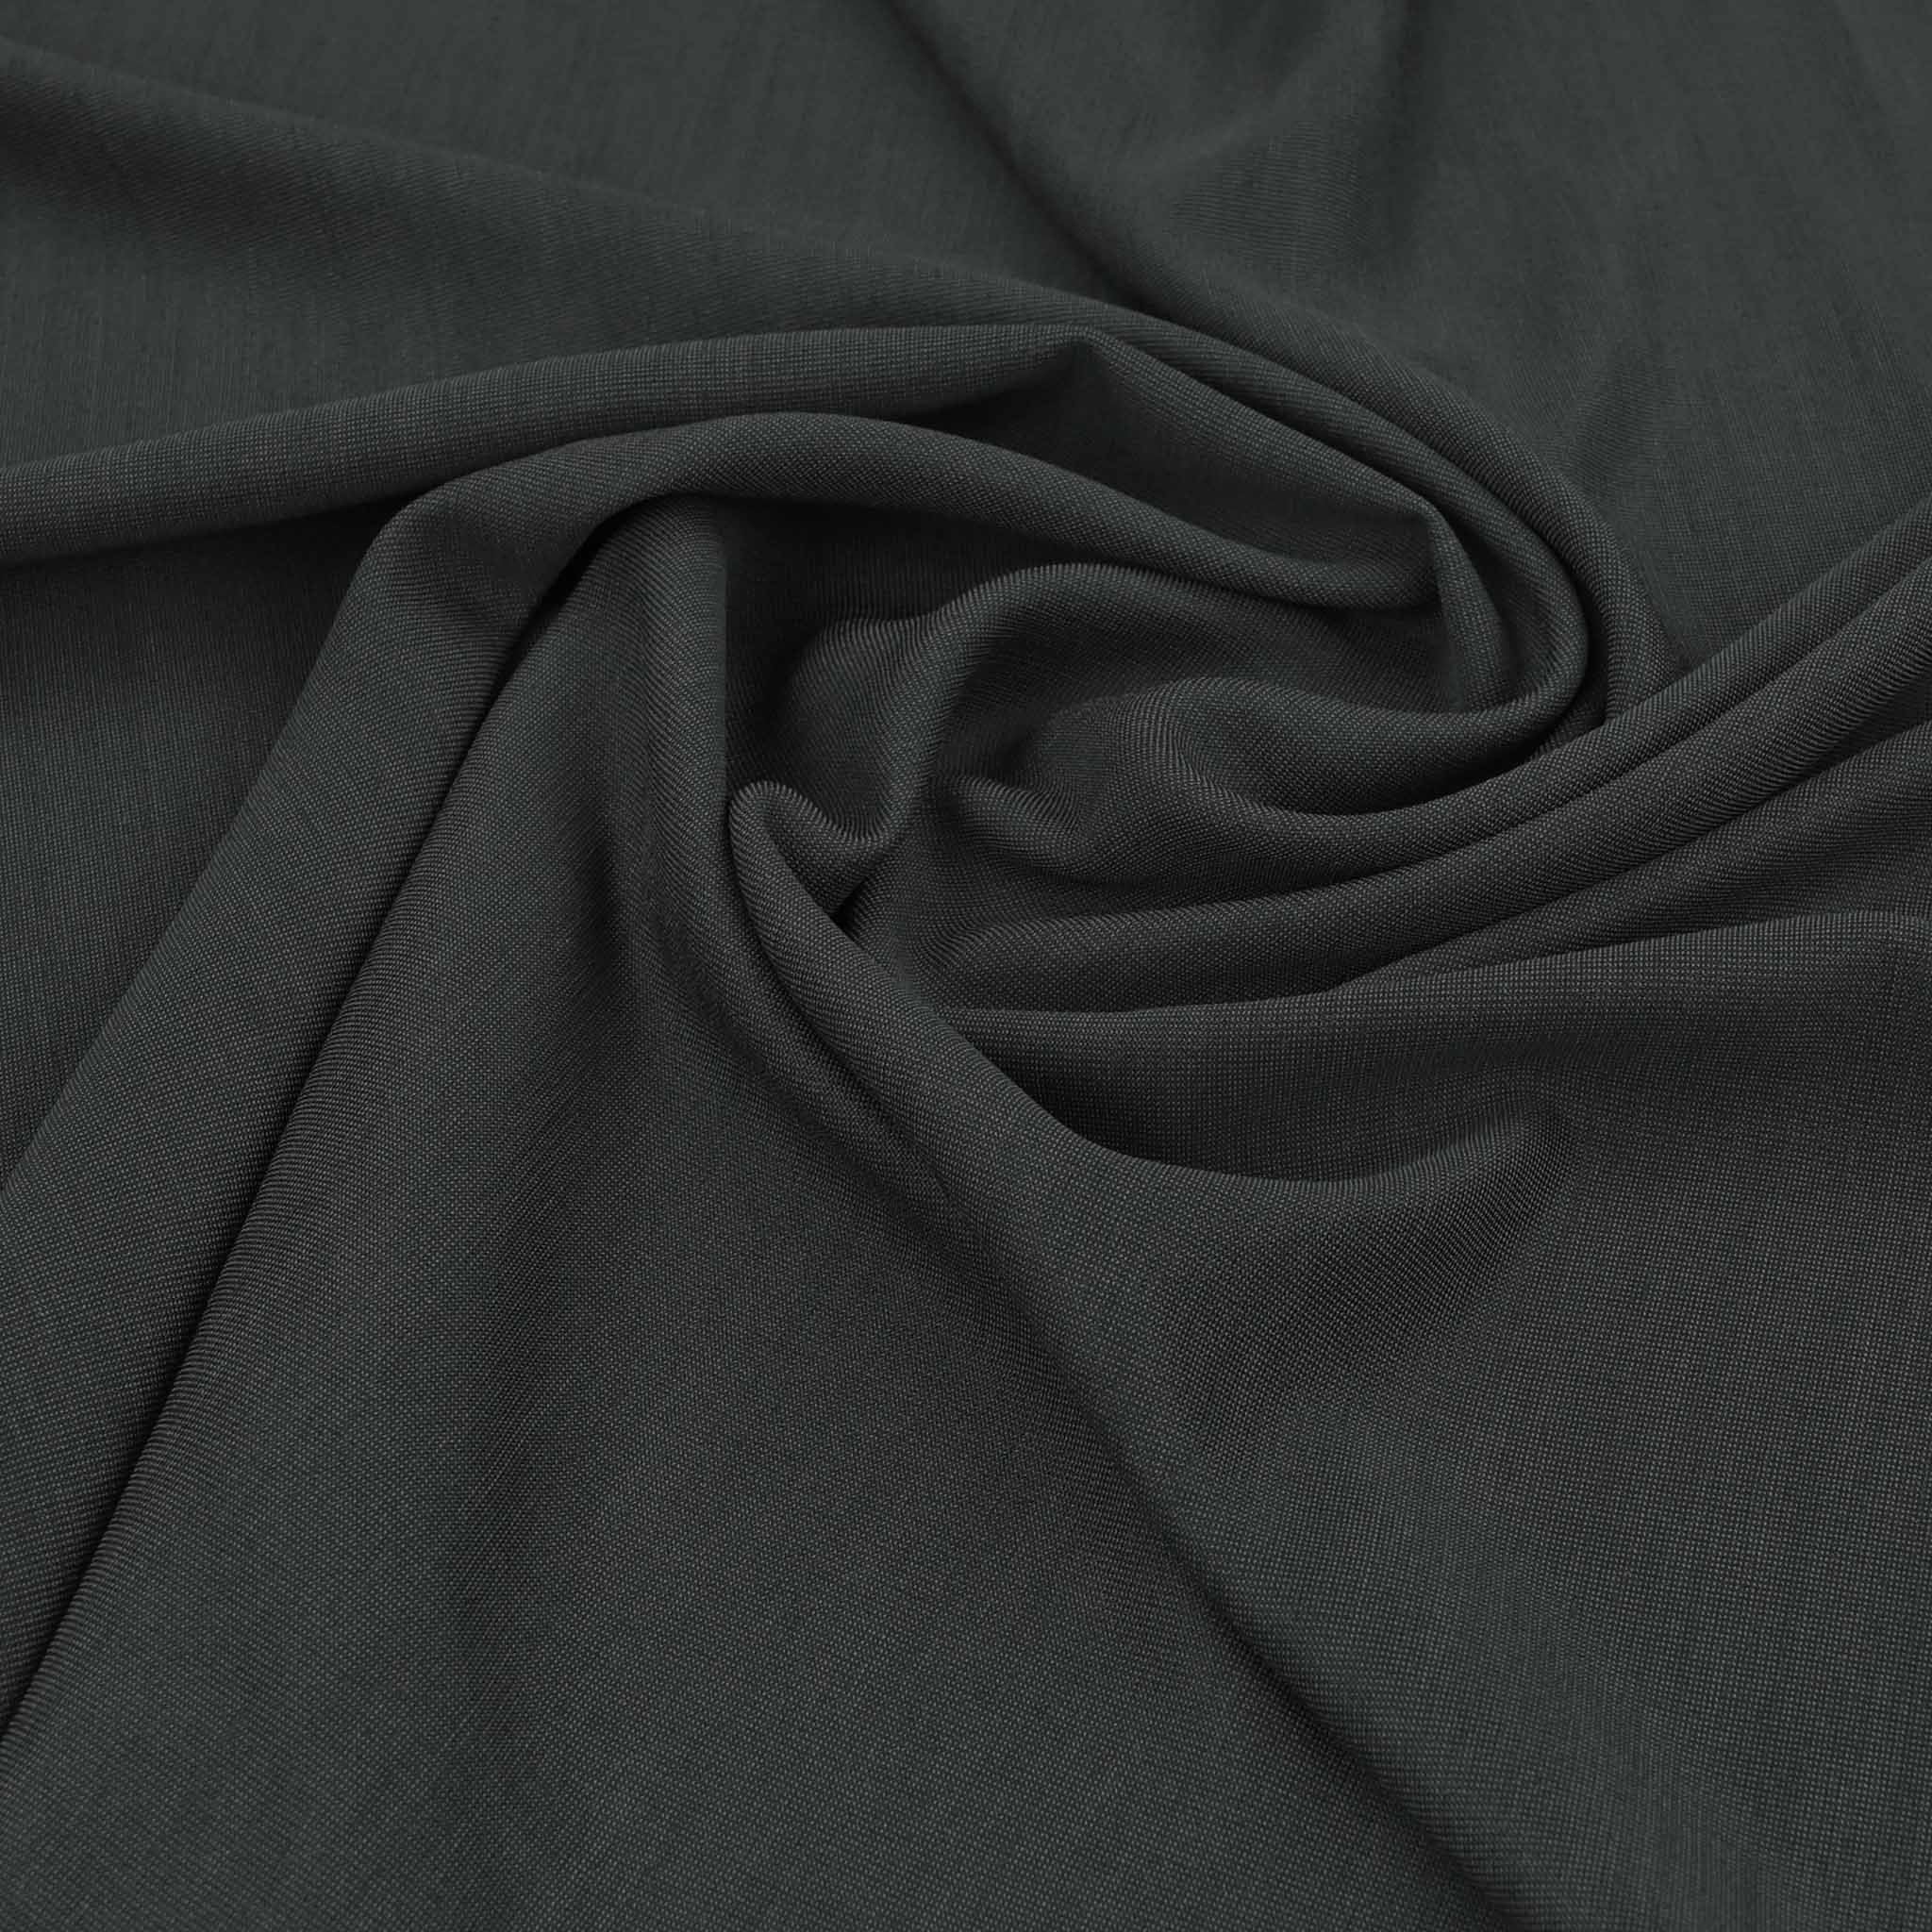 Charcoal Suiting Fabric 98153